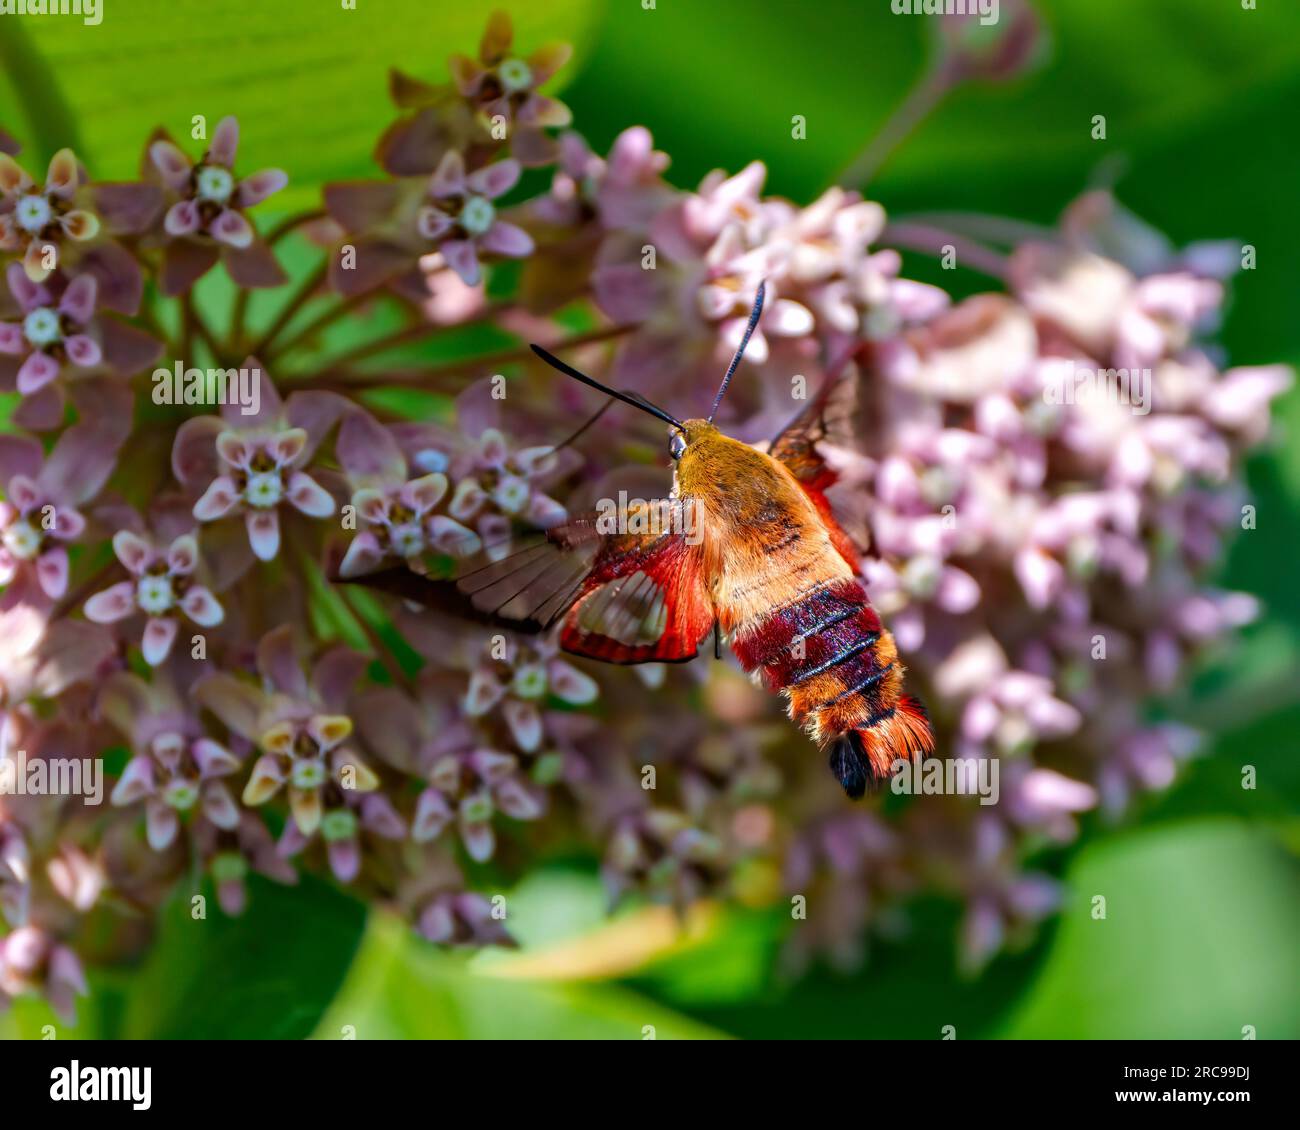 Hummingbird Clear wing Moth close-up rear-view fluttering over a milkweed plant and drinking nectar with a blur background in its environment. Stock Photo